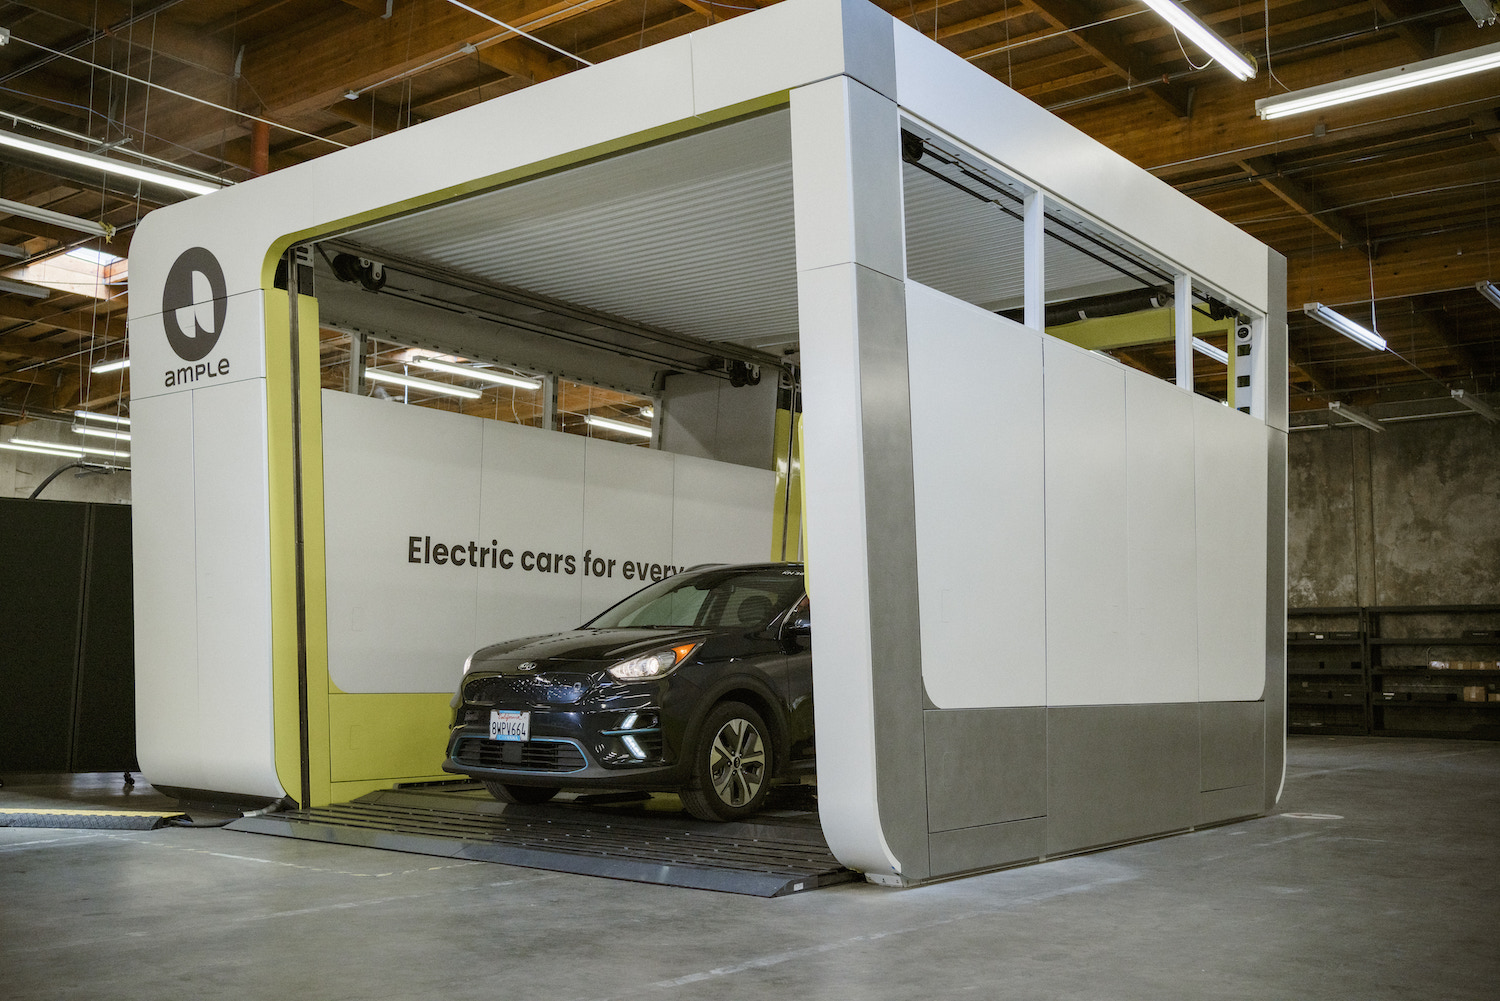 Ample EV charging battery swapping pod in garage